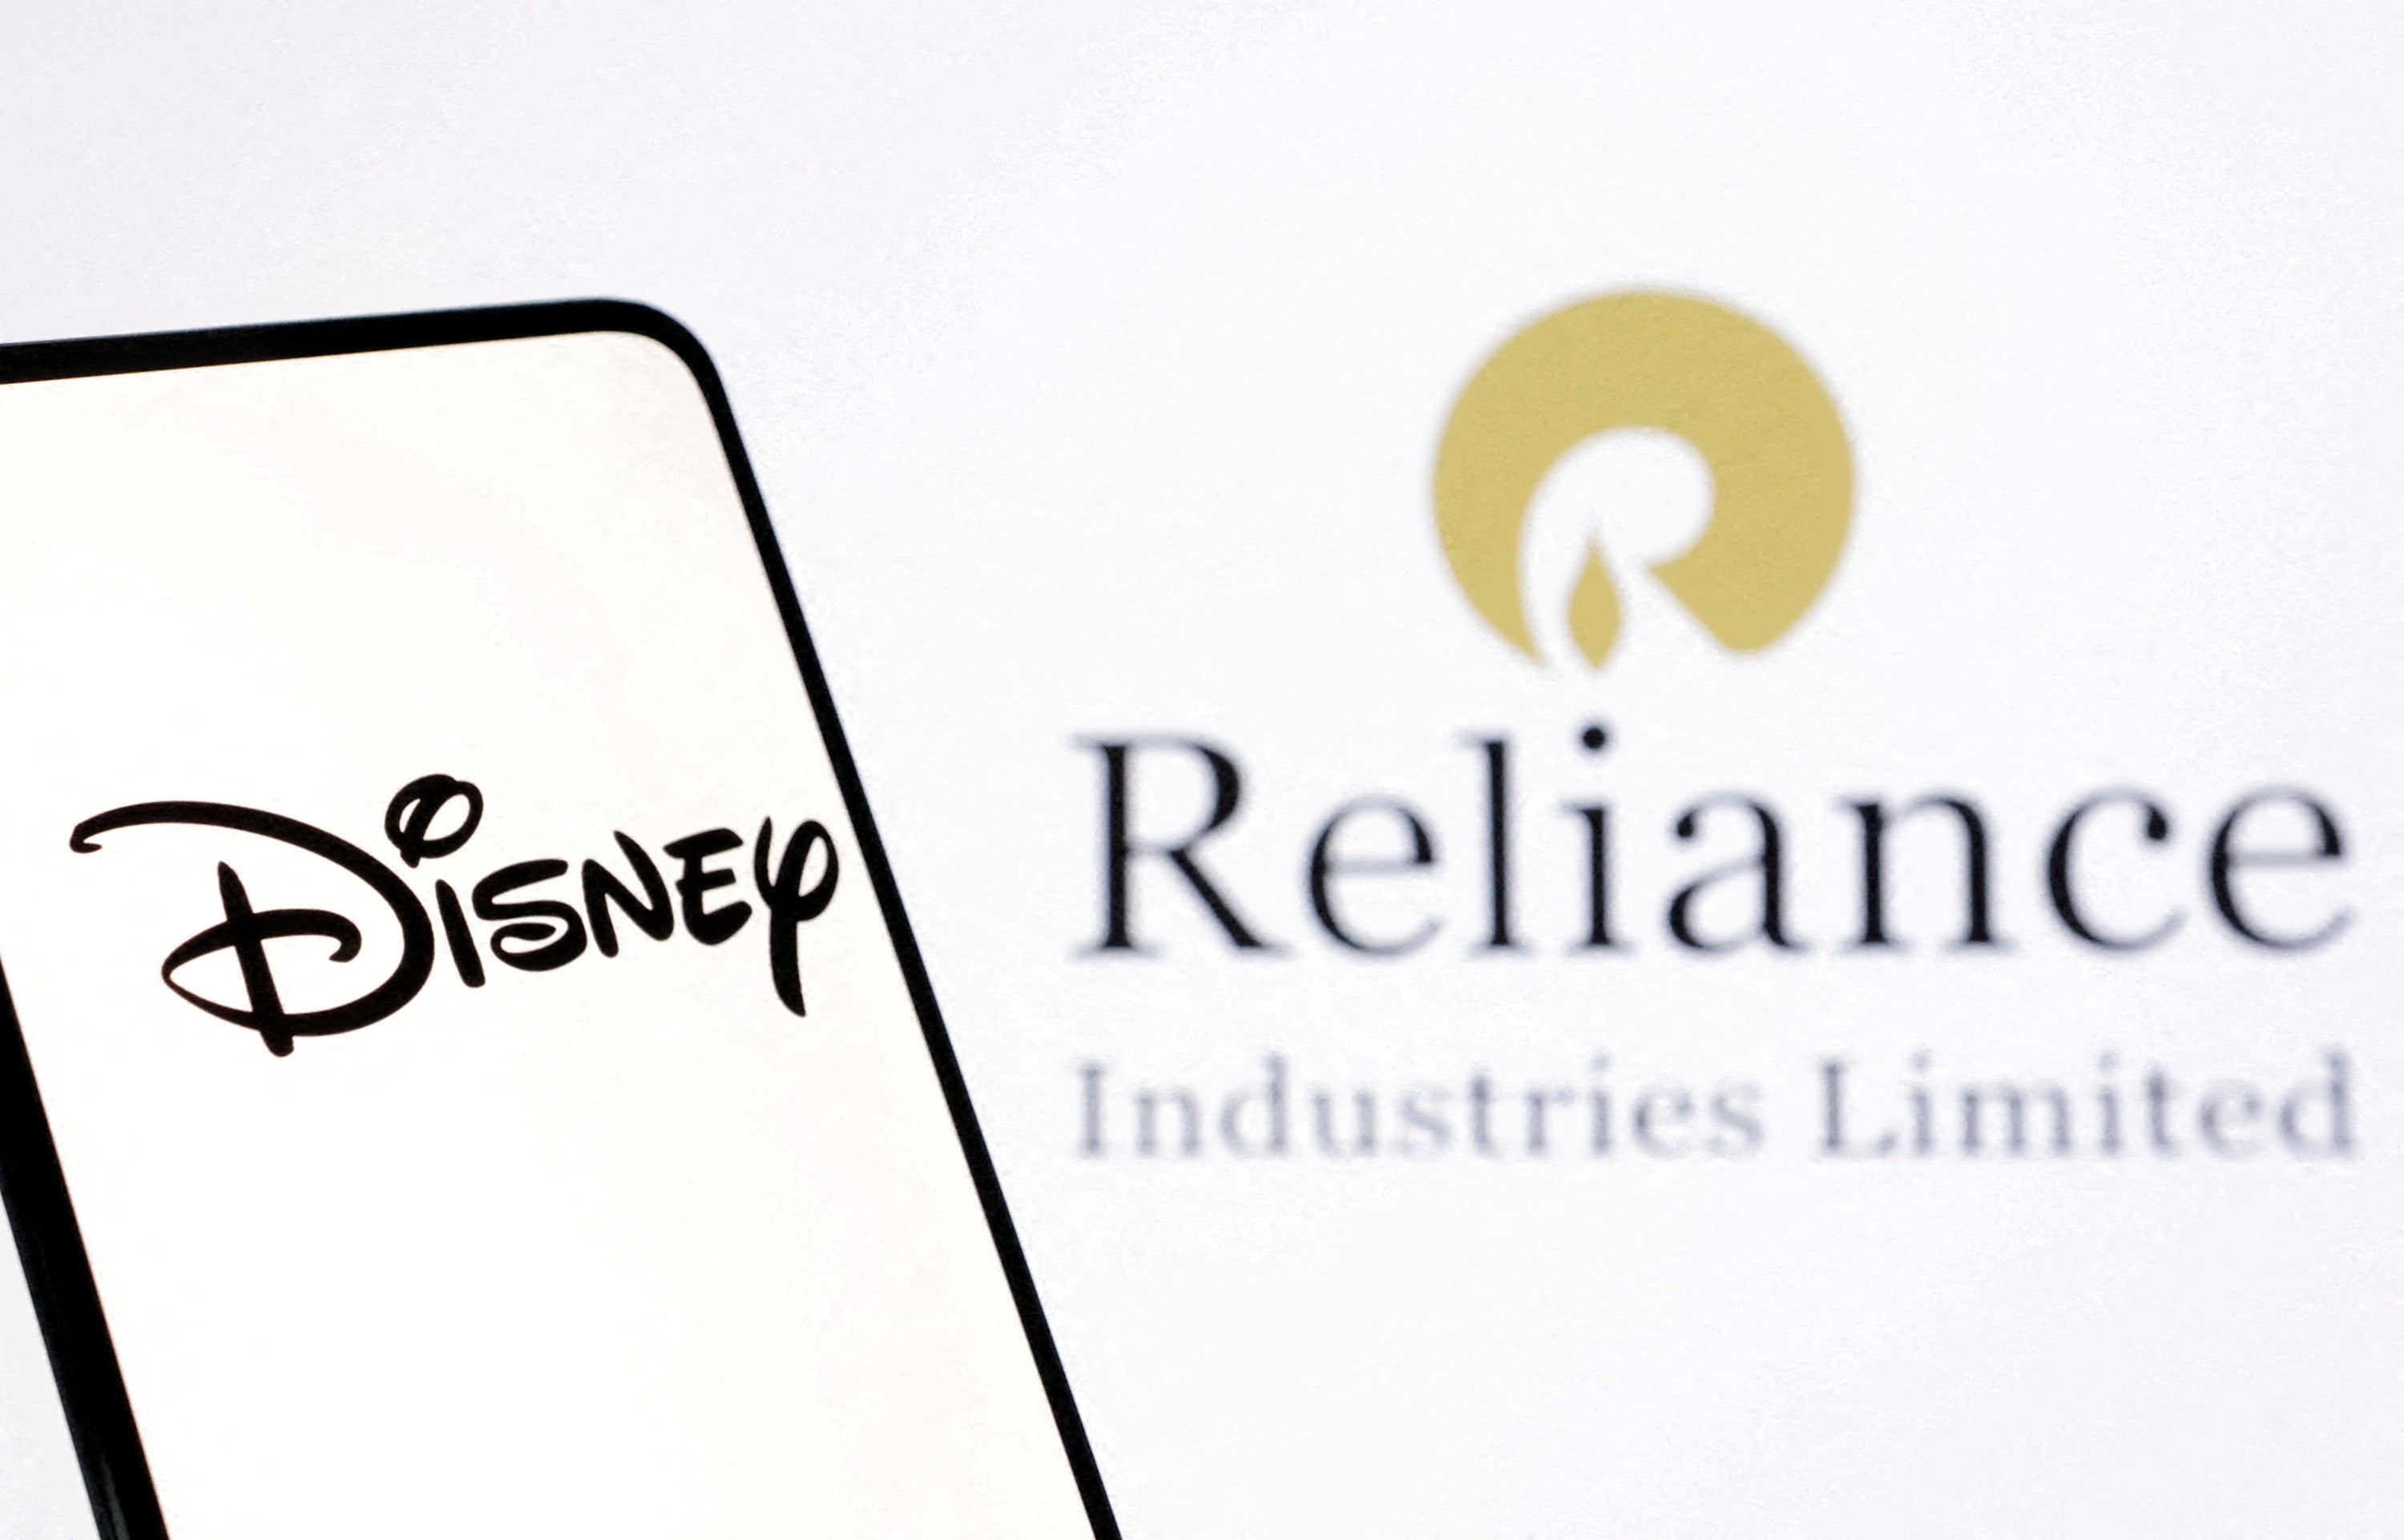 Illustration shows Disney and Reliance logos